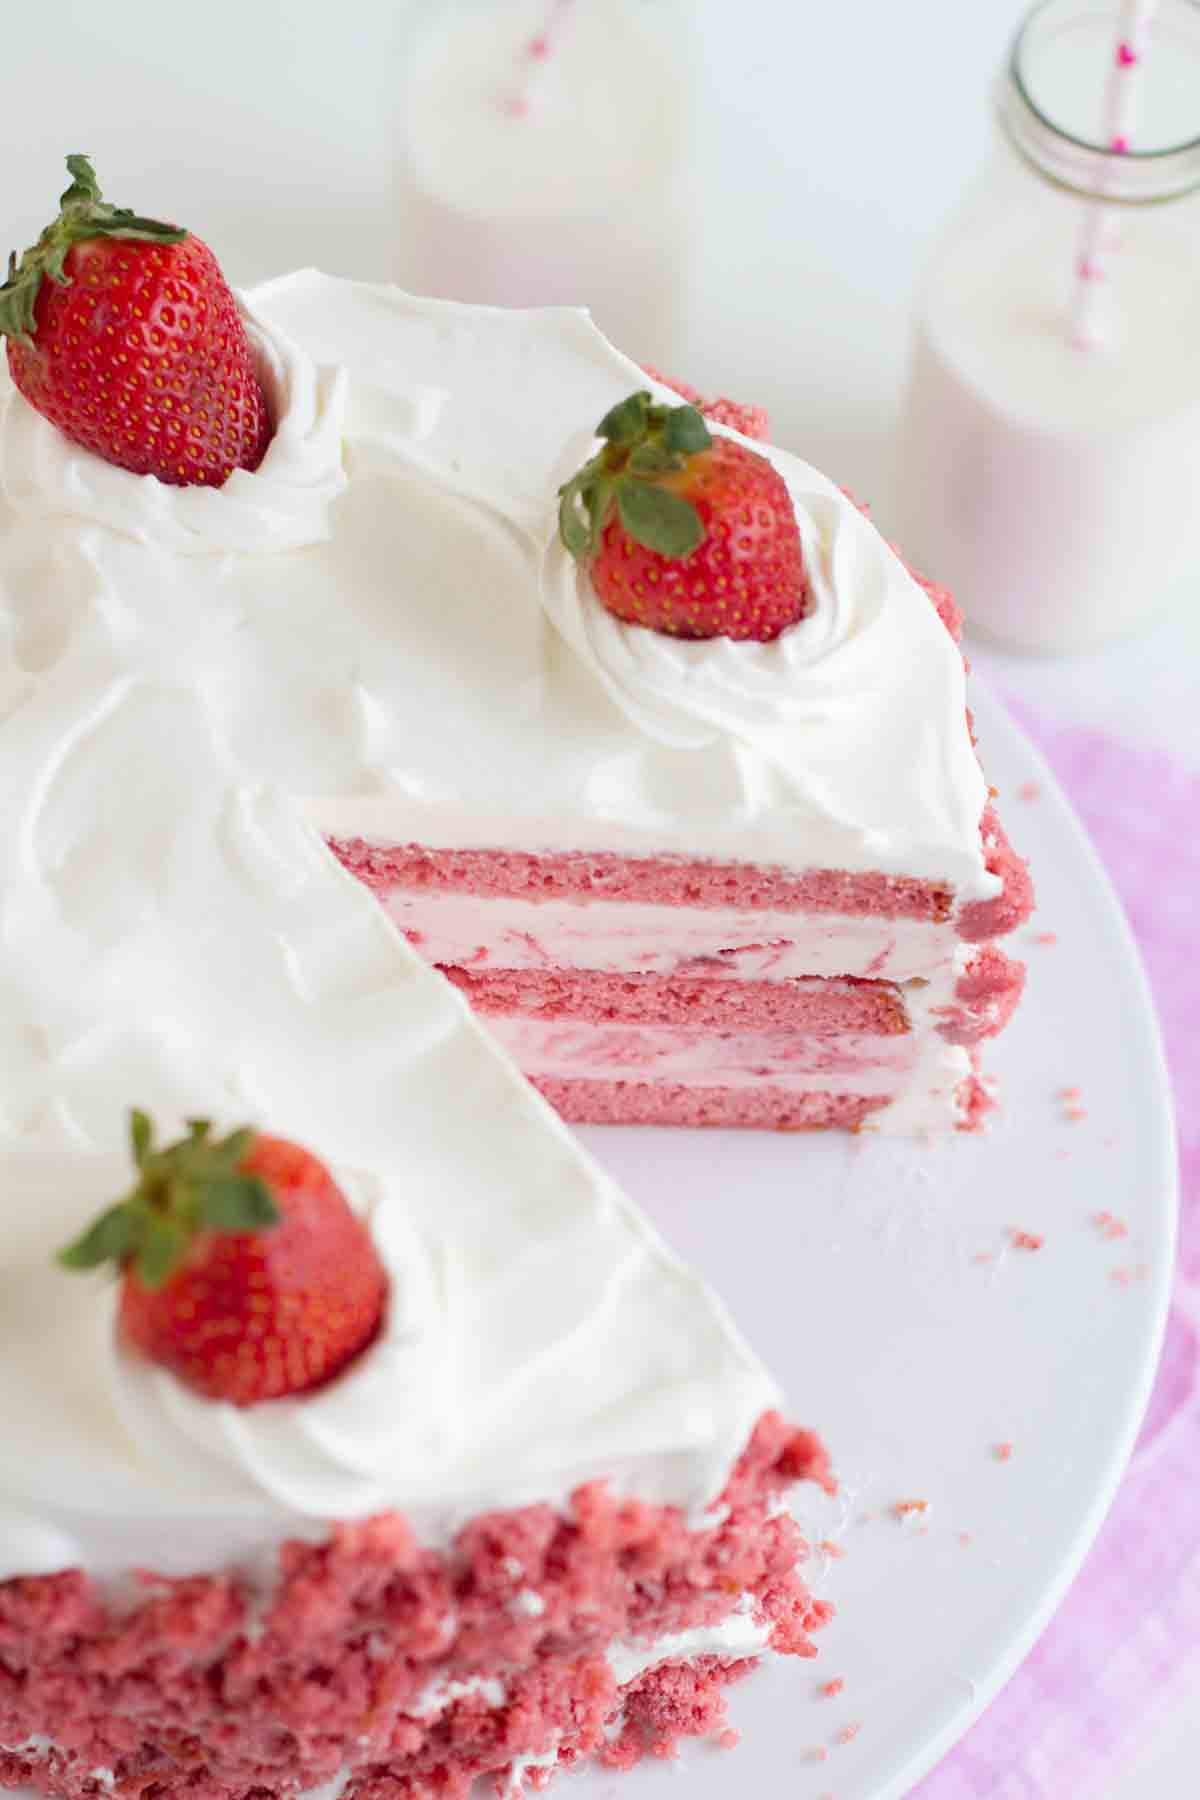 Strawberry Milkshake Ice Cream Cake with a slice taken out of it.